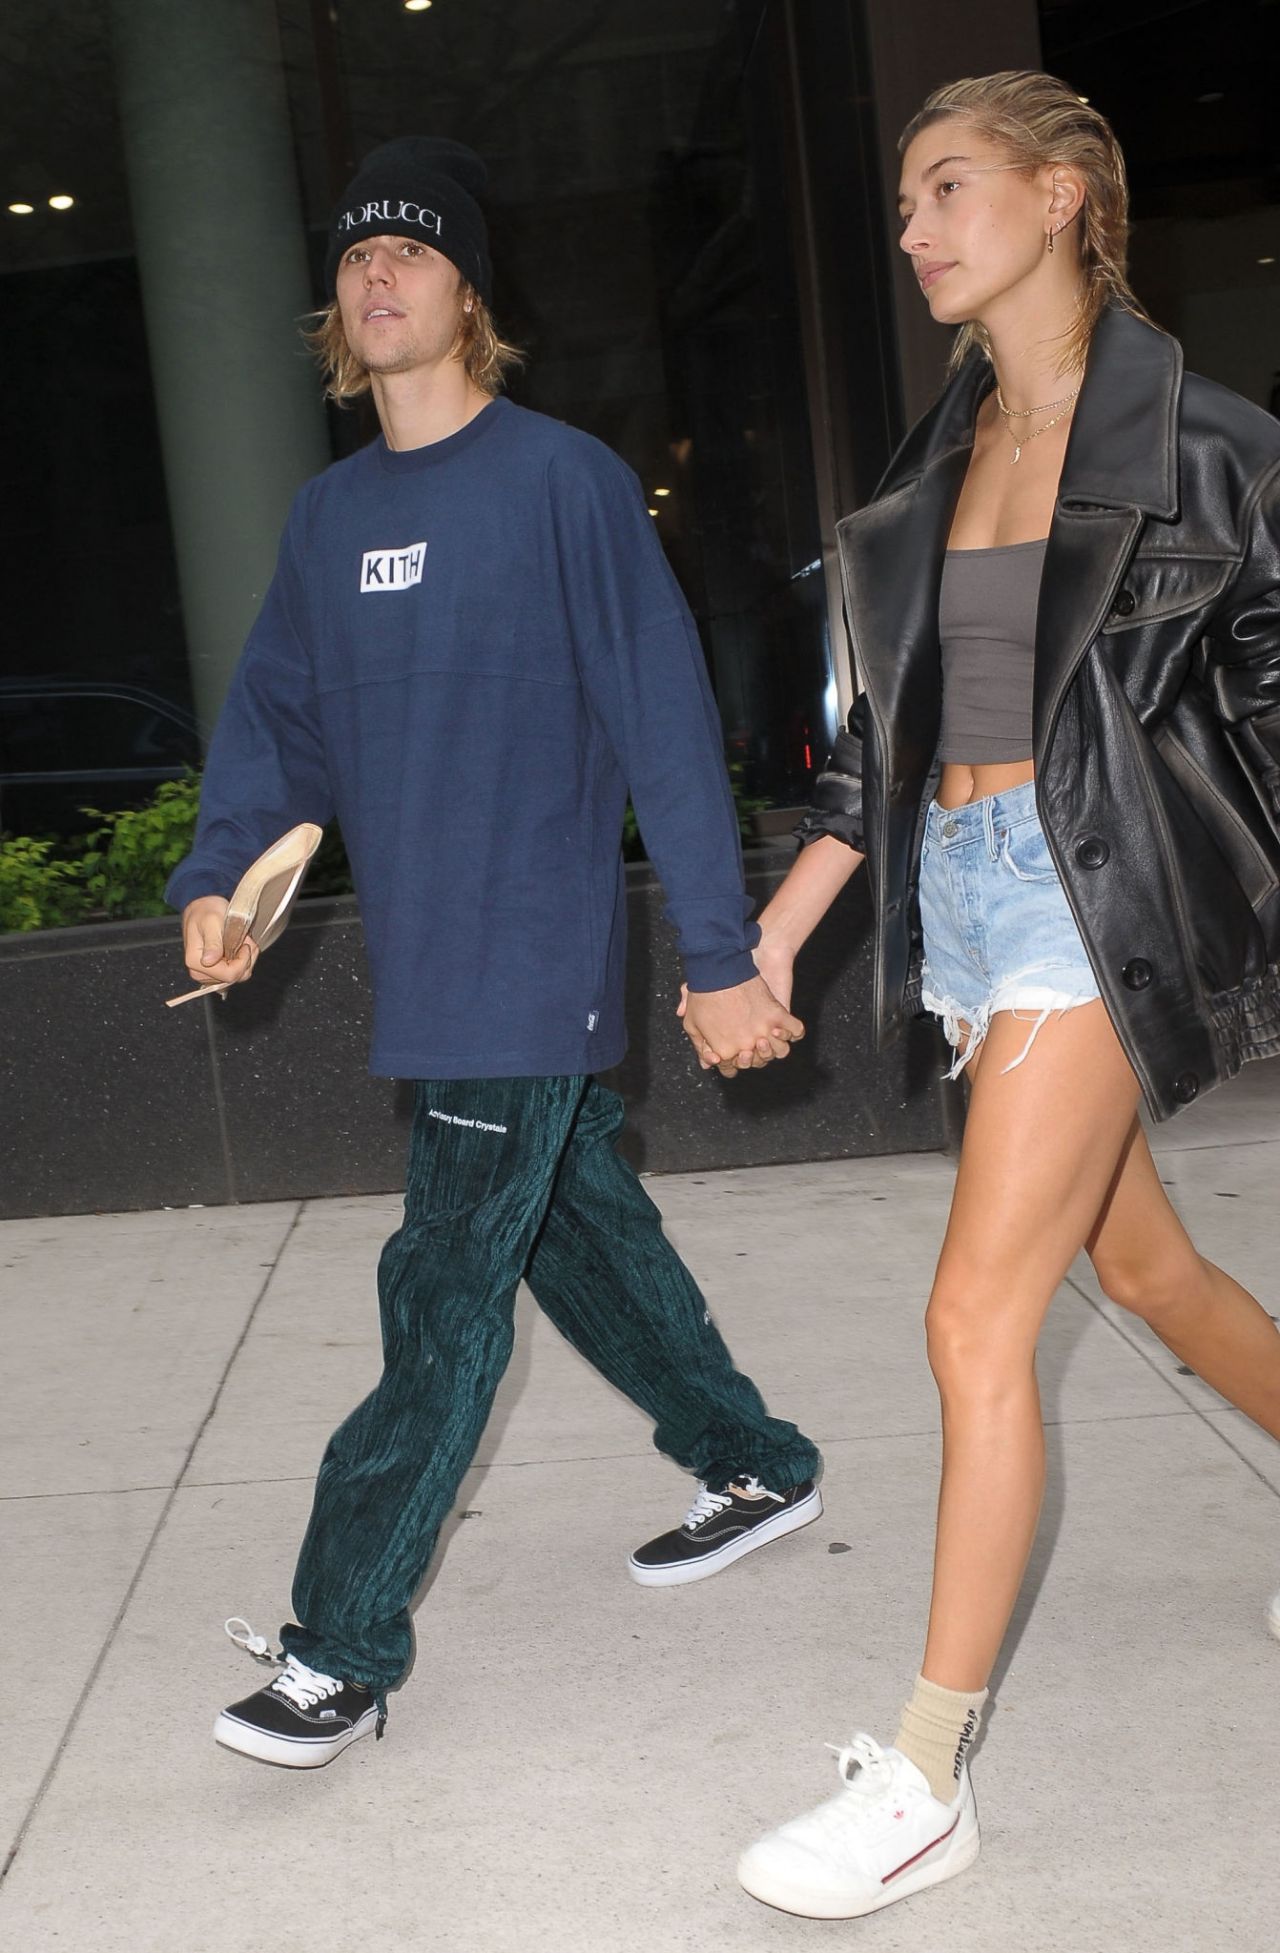 Hailey Baldwin And Justin Bieber Obtained Their Marriage